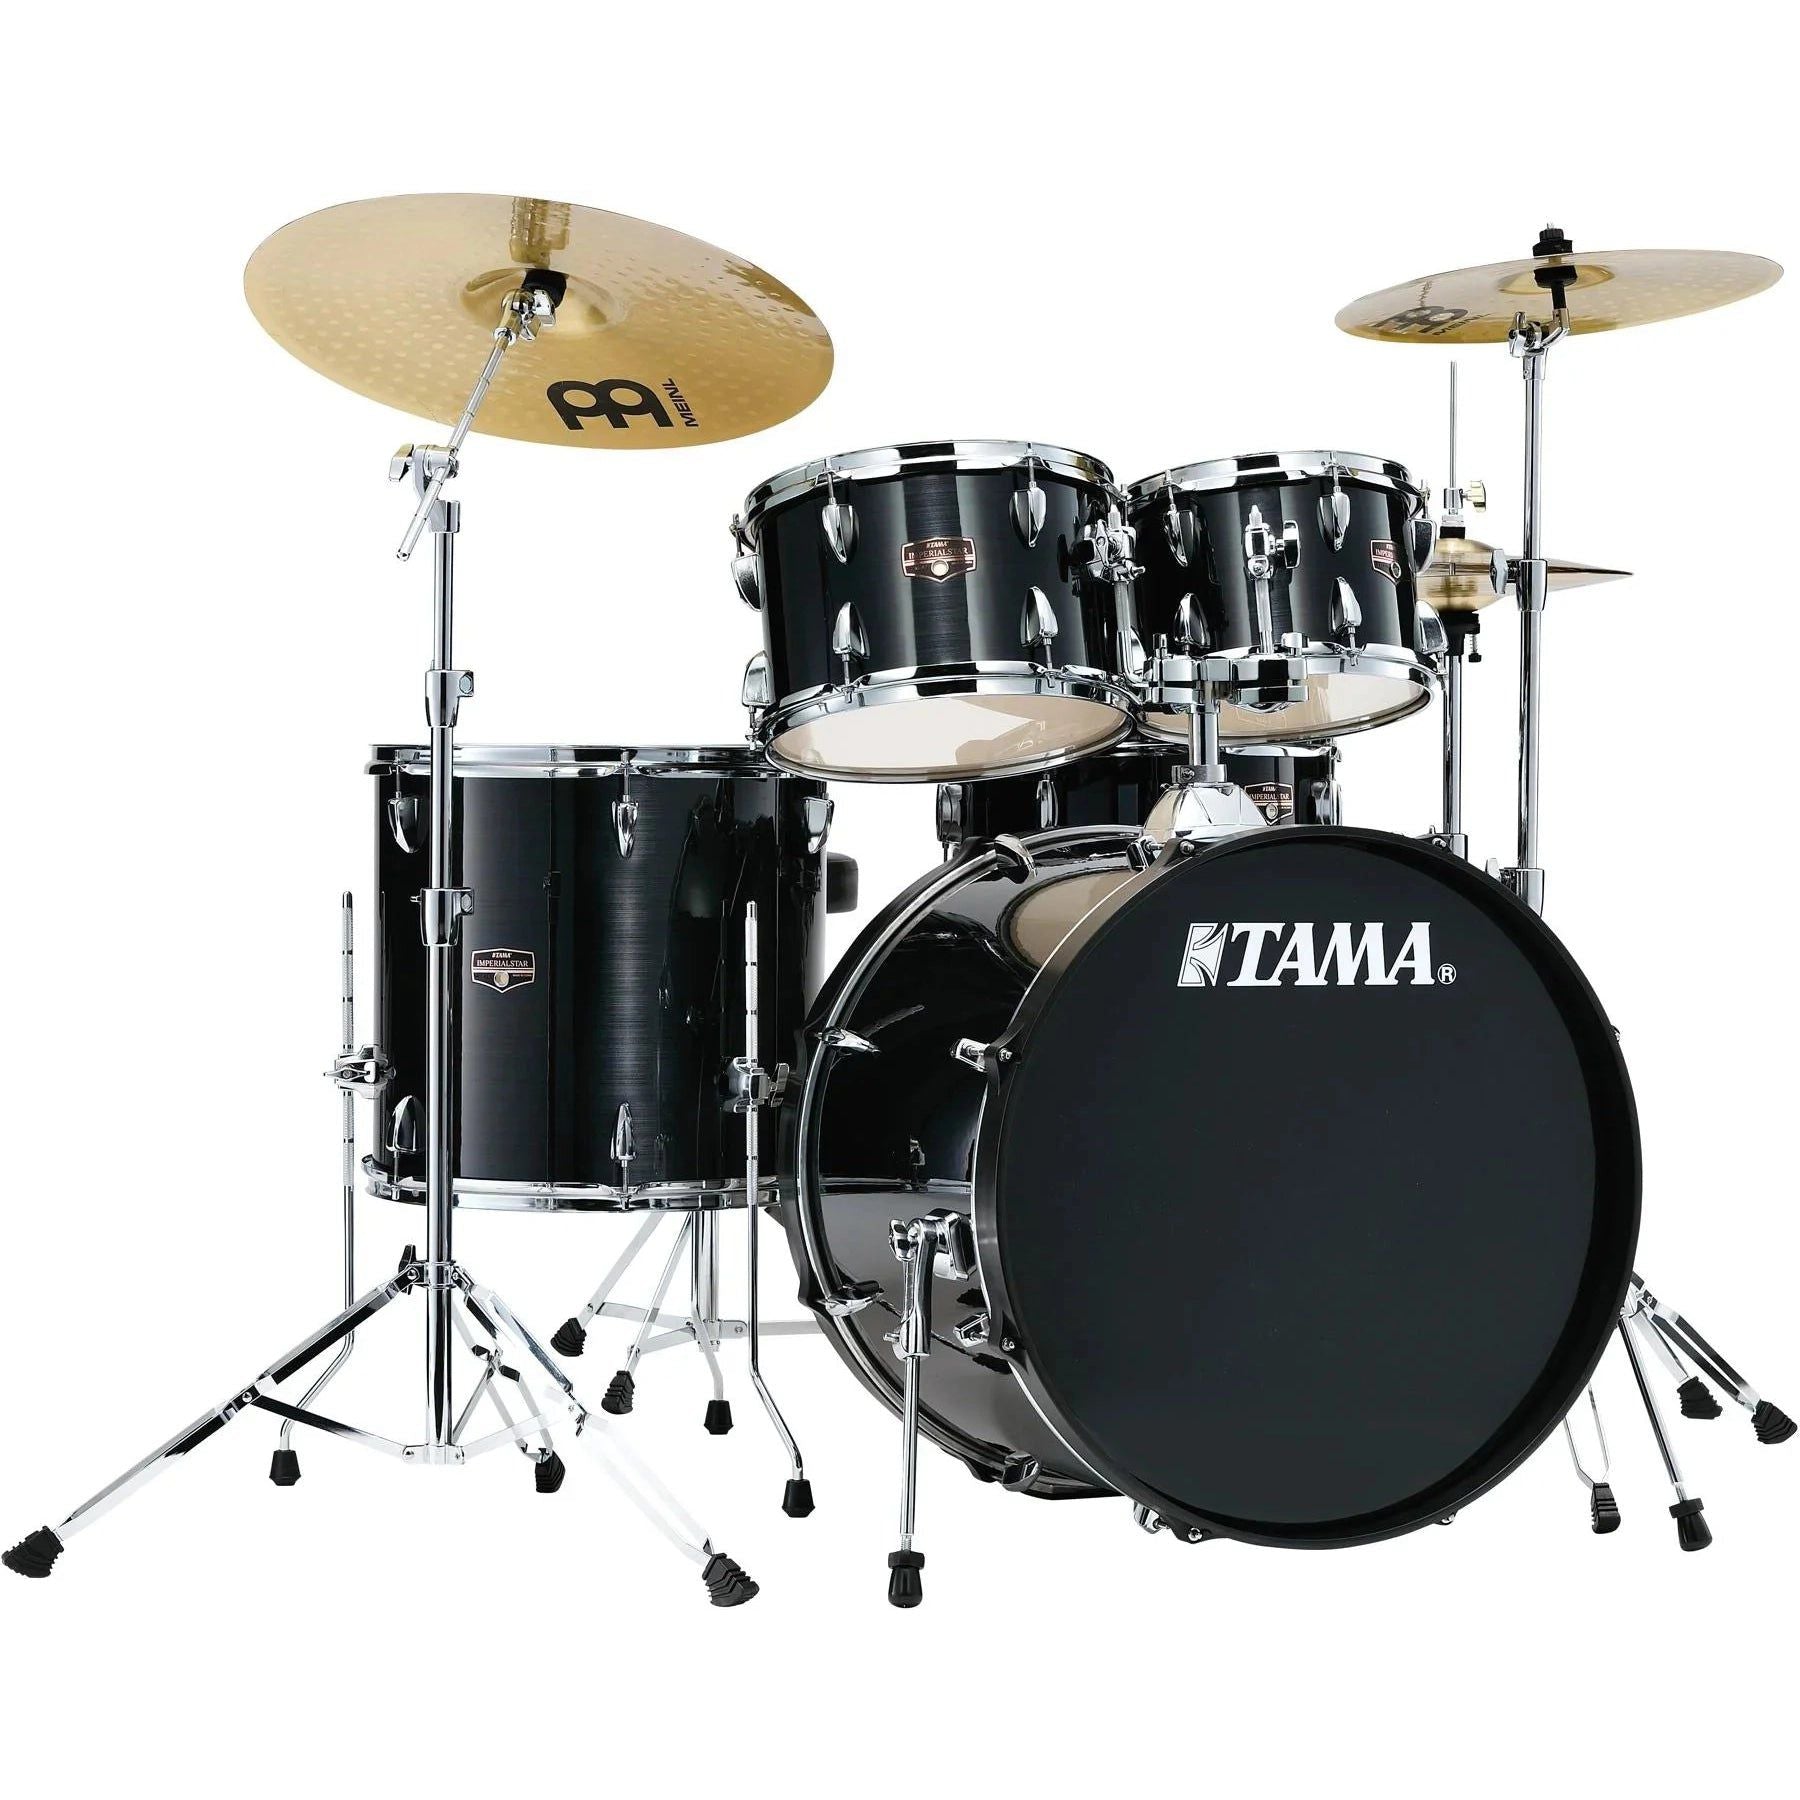 Trống Cơ Tama Imperialstar IE52C (22/10-12/16/14 + Cymbal), Accu-Tune Hoop - Việt Music